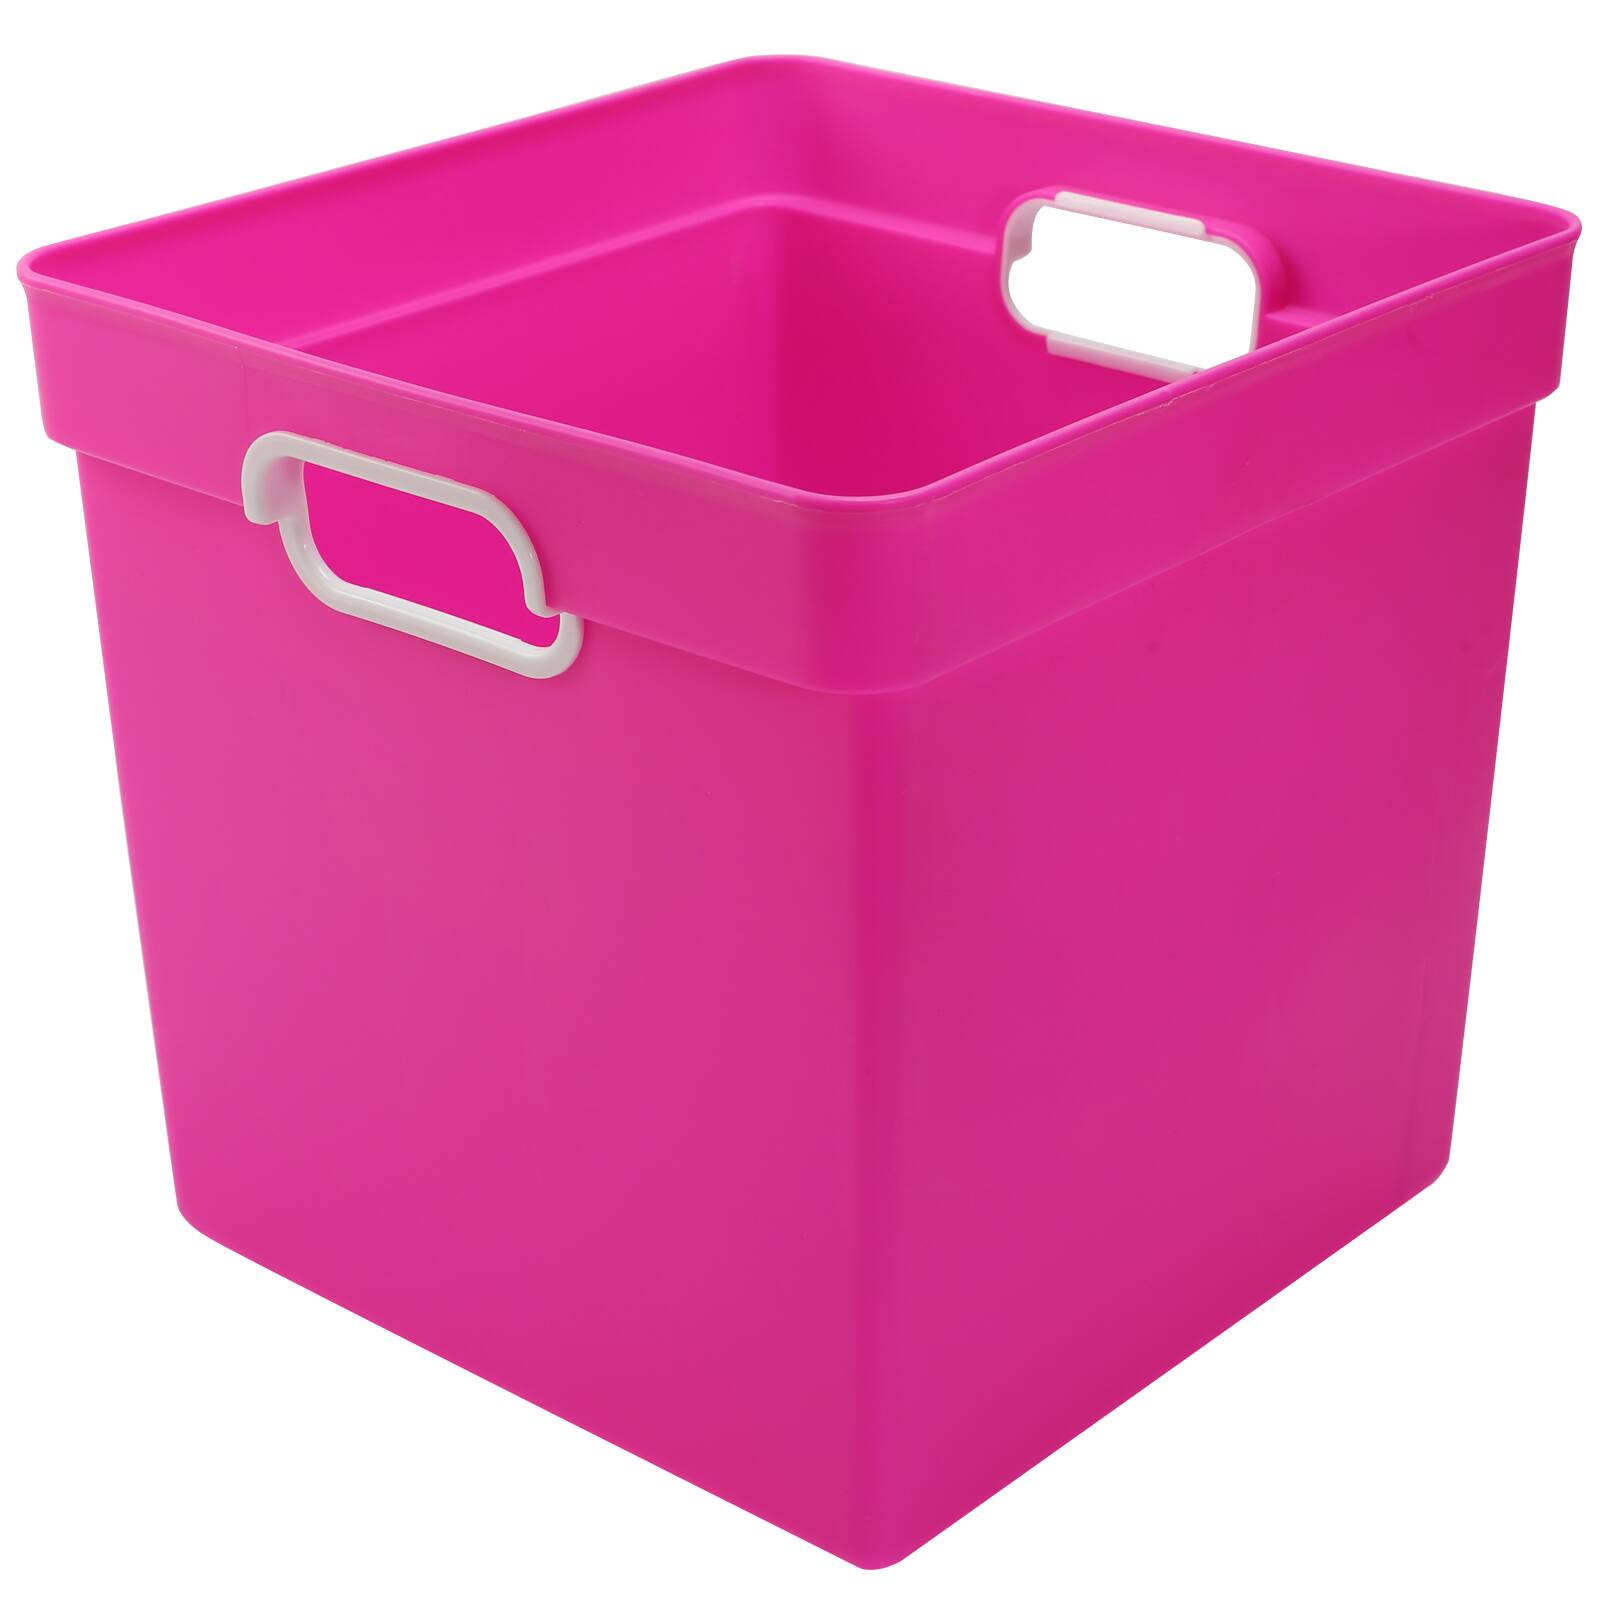 Purchase the Plastic Storage Cube by Ashland® at Michaels